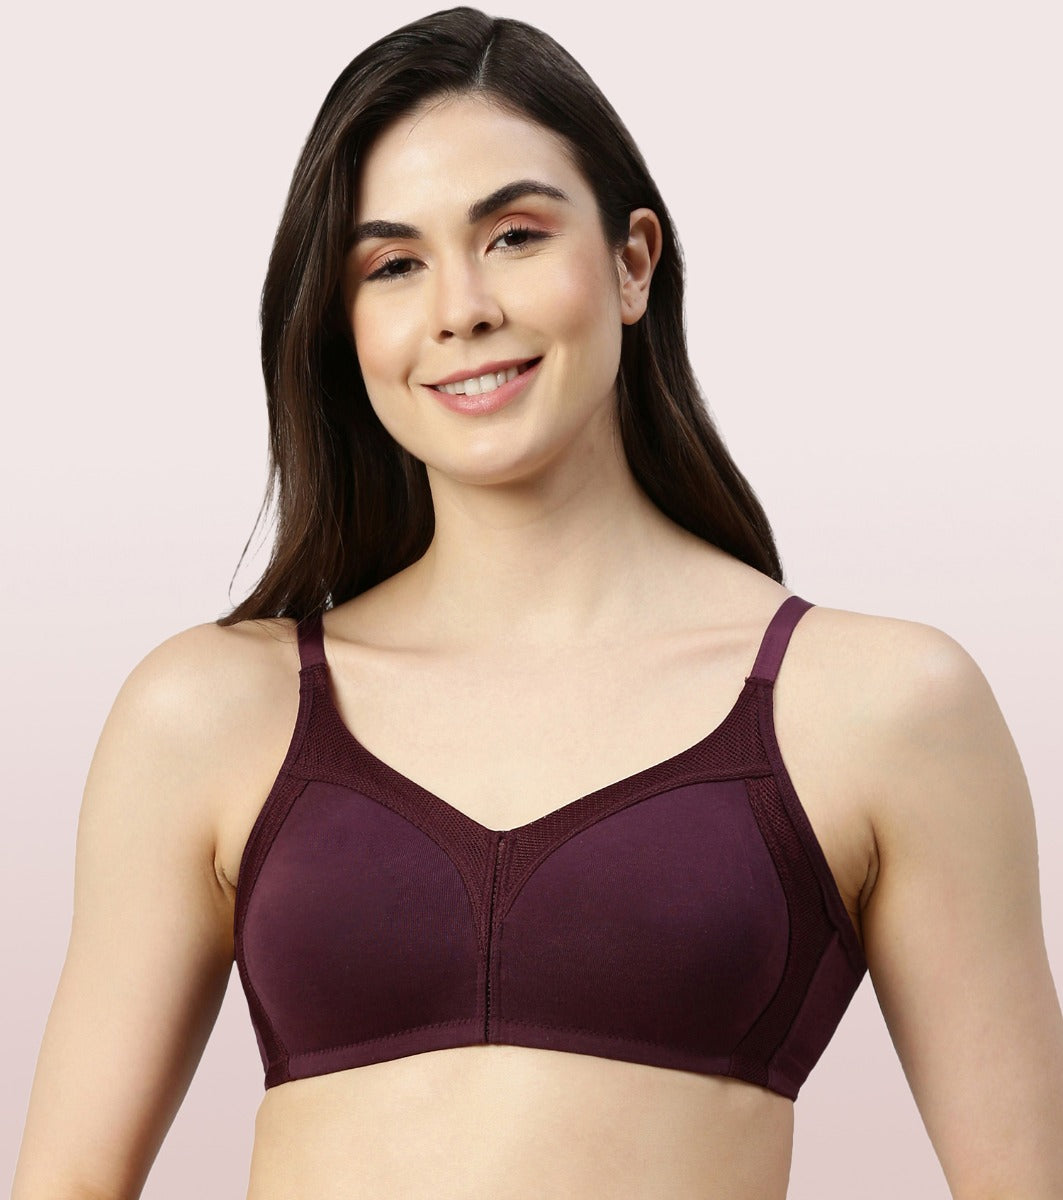 RYRJJ Wireless Support Bras for Women Striped Full Cup Lift Plus Size Bras  Wirefree Push Up Shaping Comfort Everyday Bralette Bras(Purple,M) 